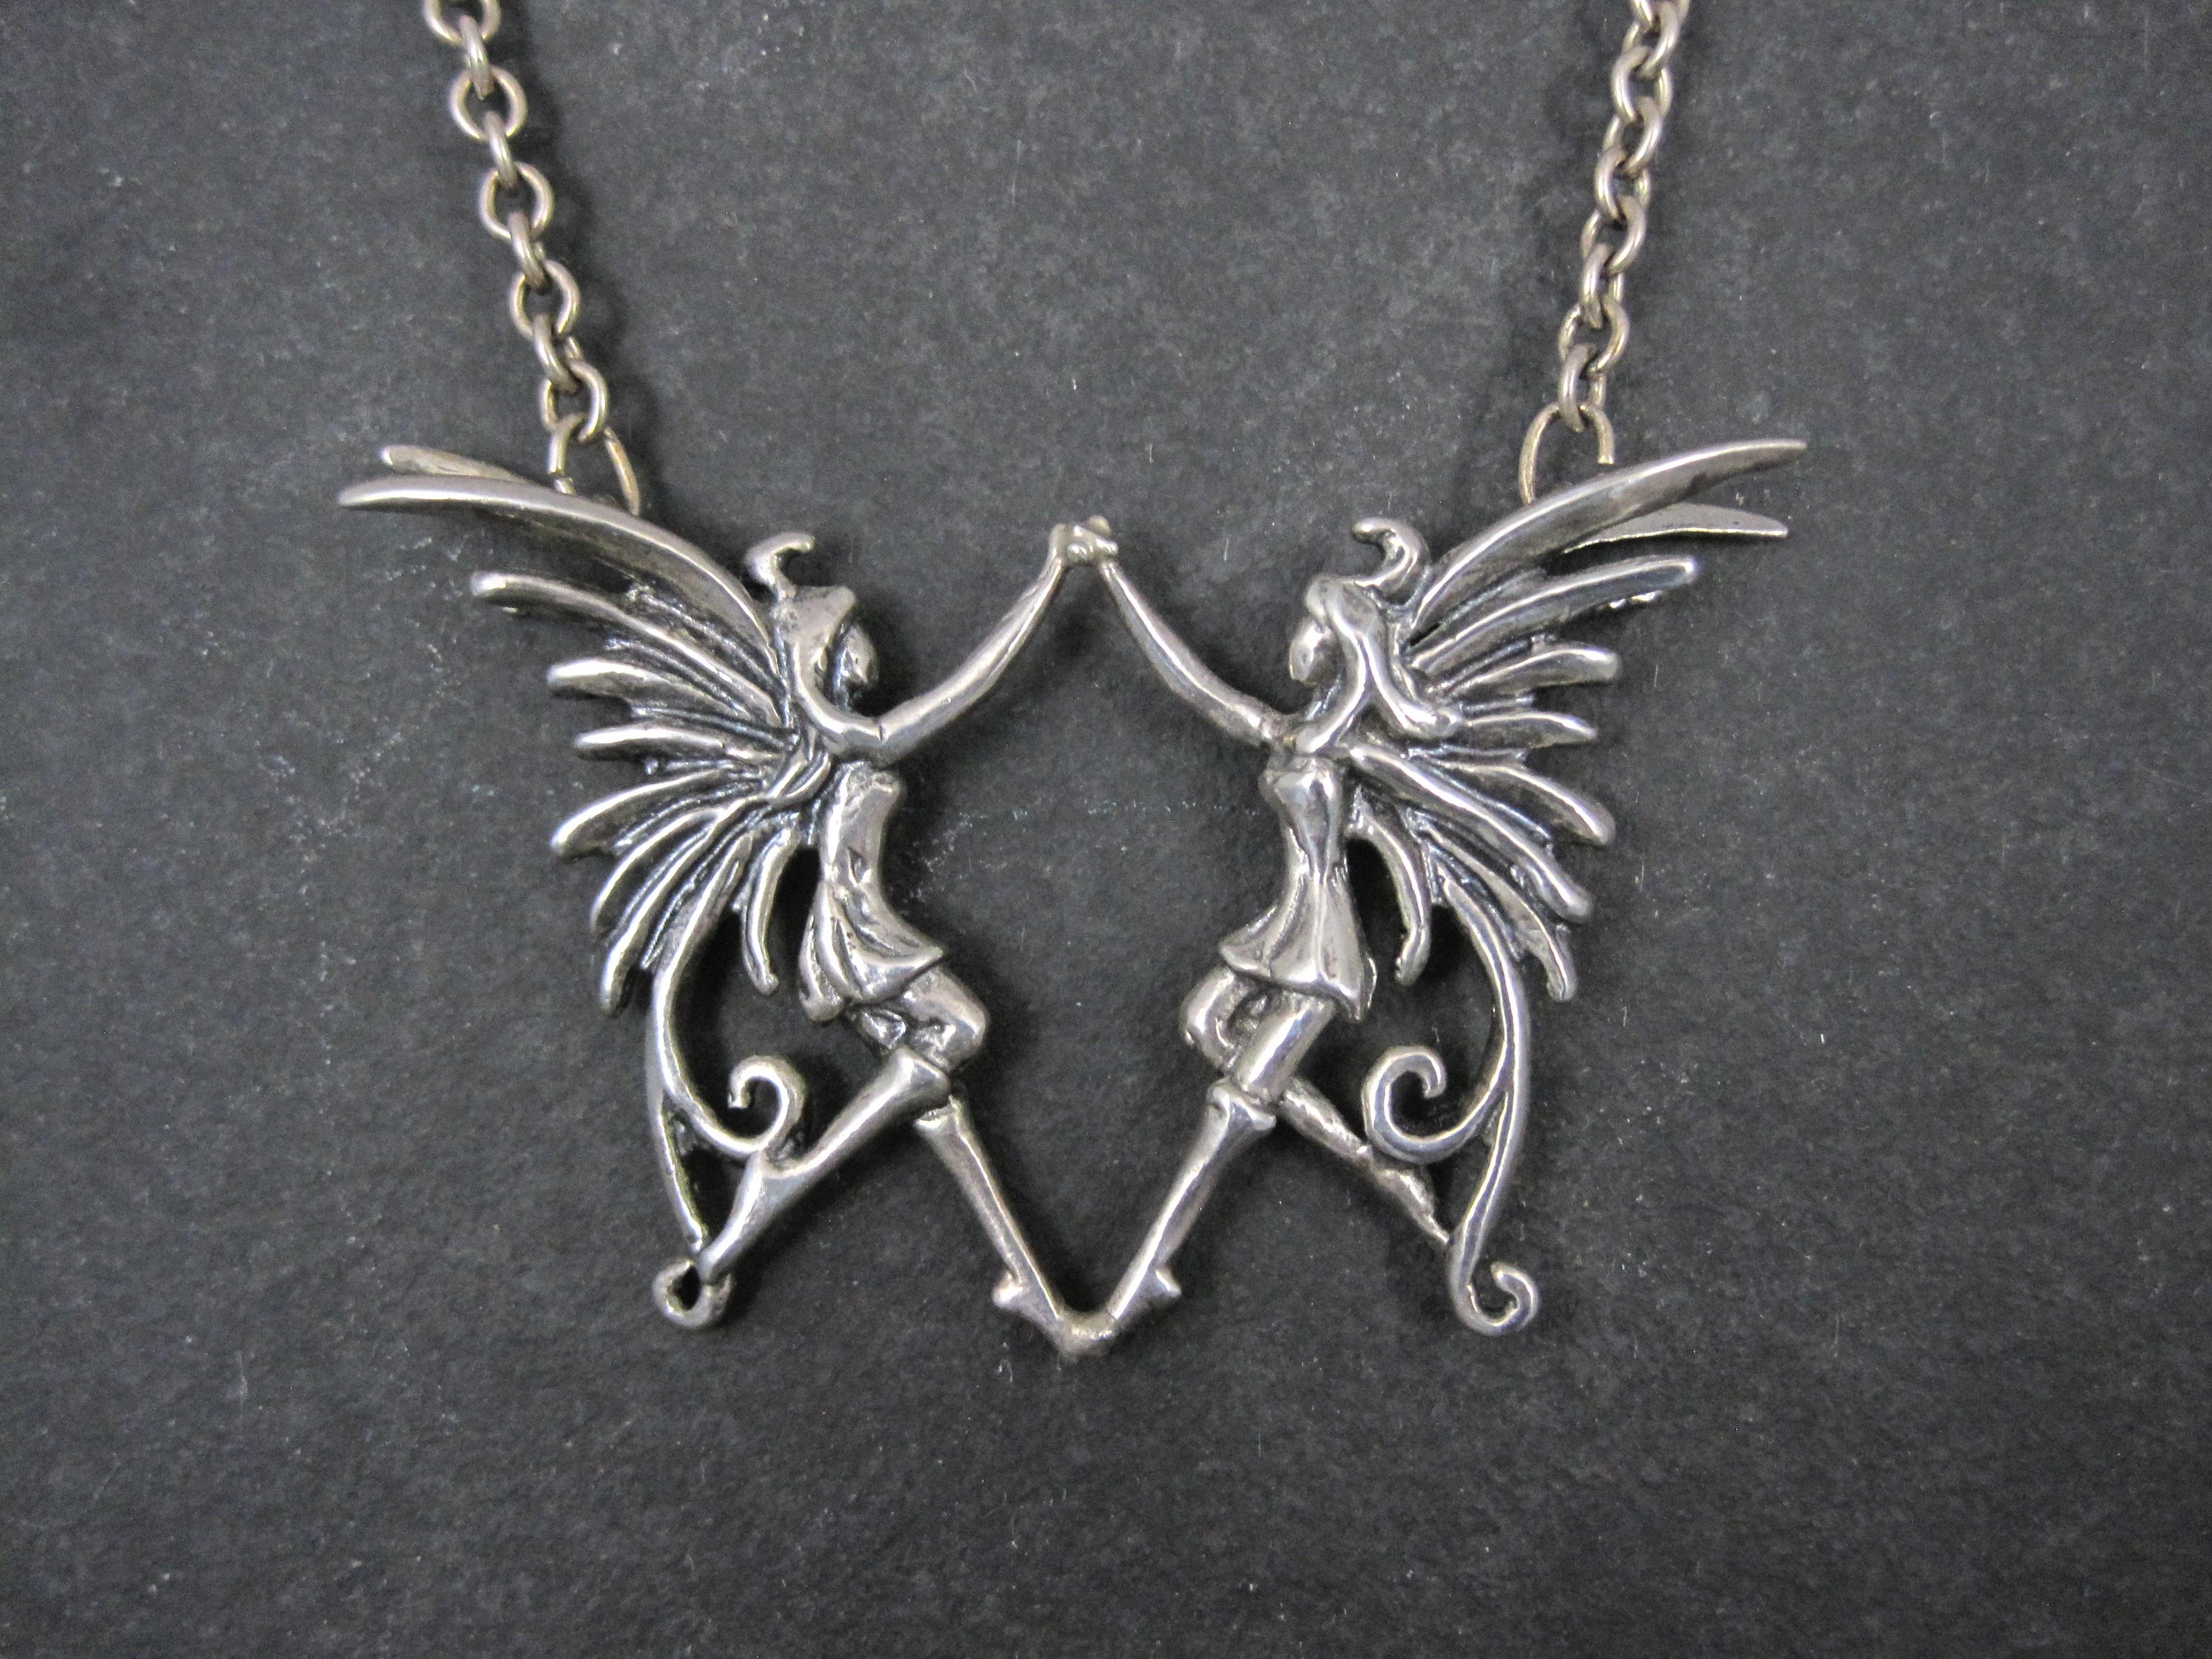 This beautiful and unusual necklace is sterling silver.
It features detailed fairies touching toes and holding hands as if they were dancing.

The pendant measures 1 5/8 by 2 9/16 inches.
The chain measures 17 1/2 inches from end to end.
Weight: